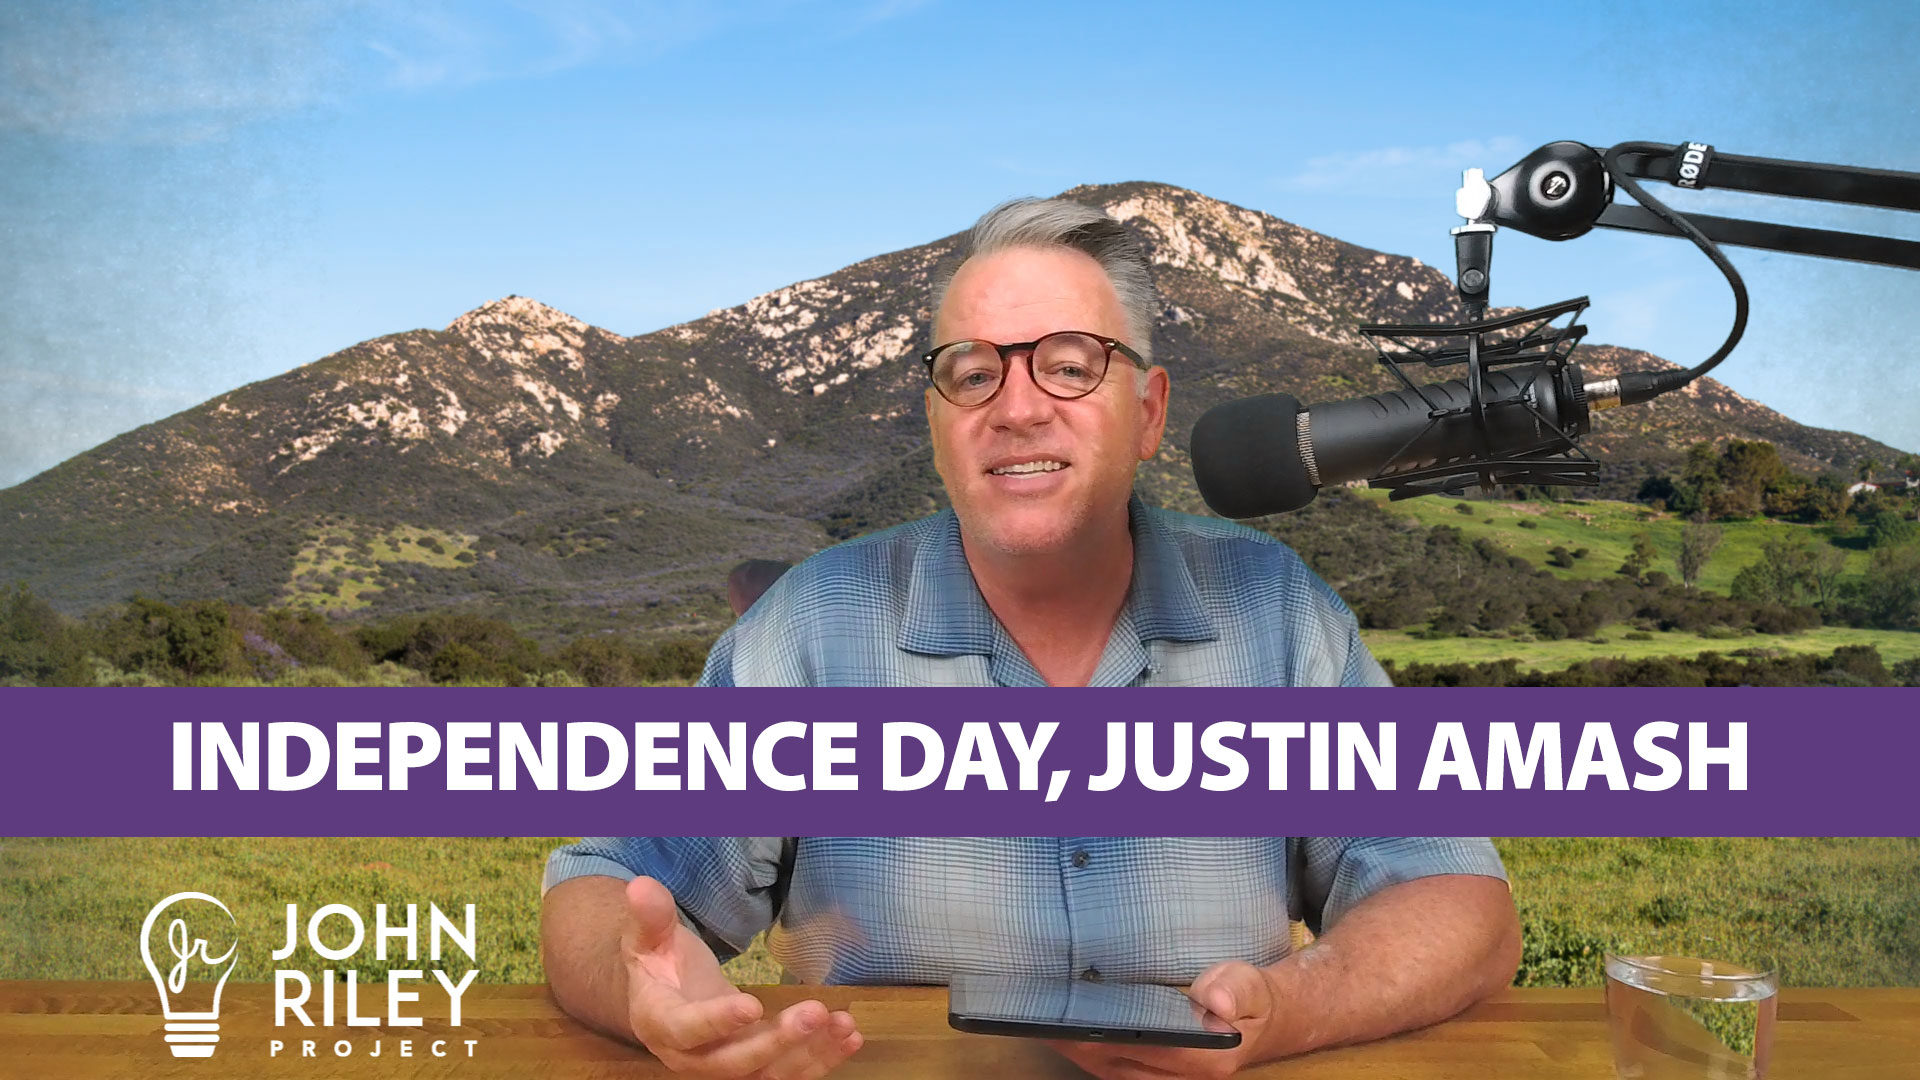 Declaration of Independence, Justin Amash, Independence Day, John Riley Project, JRP0061